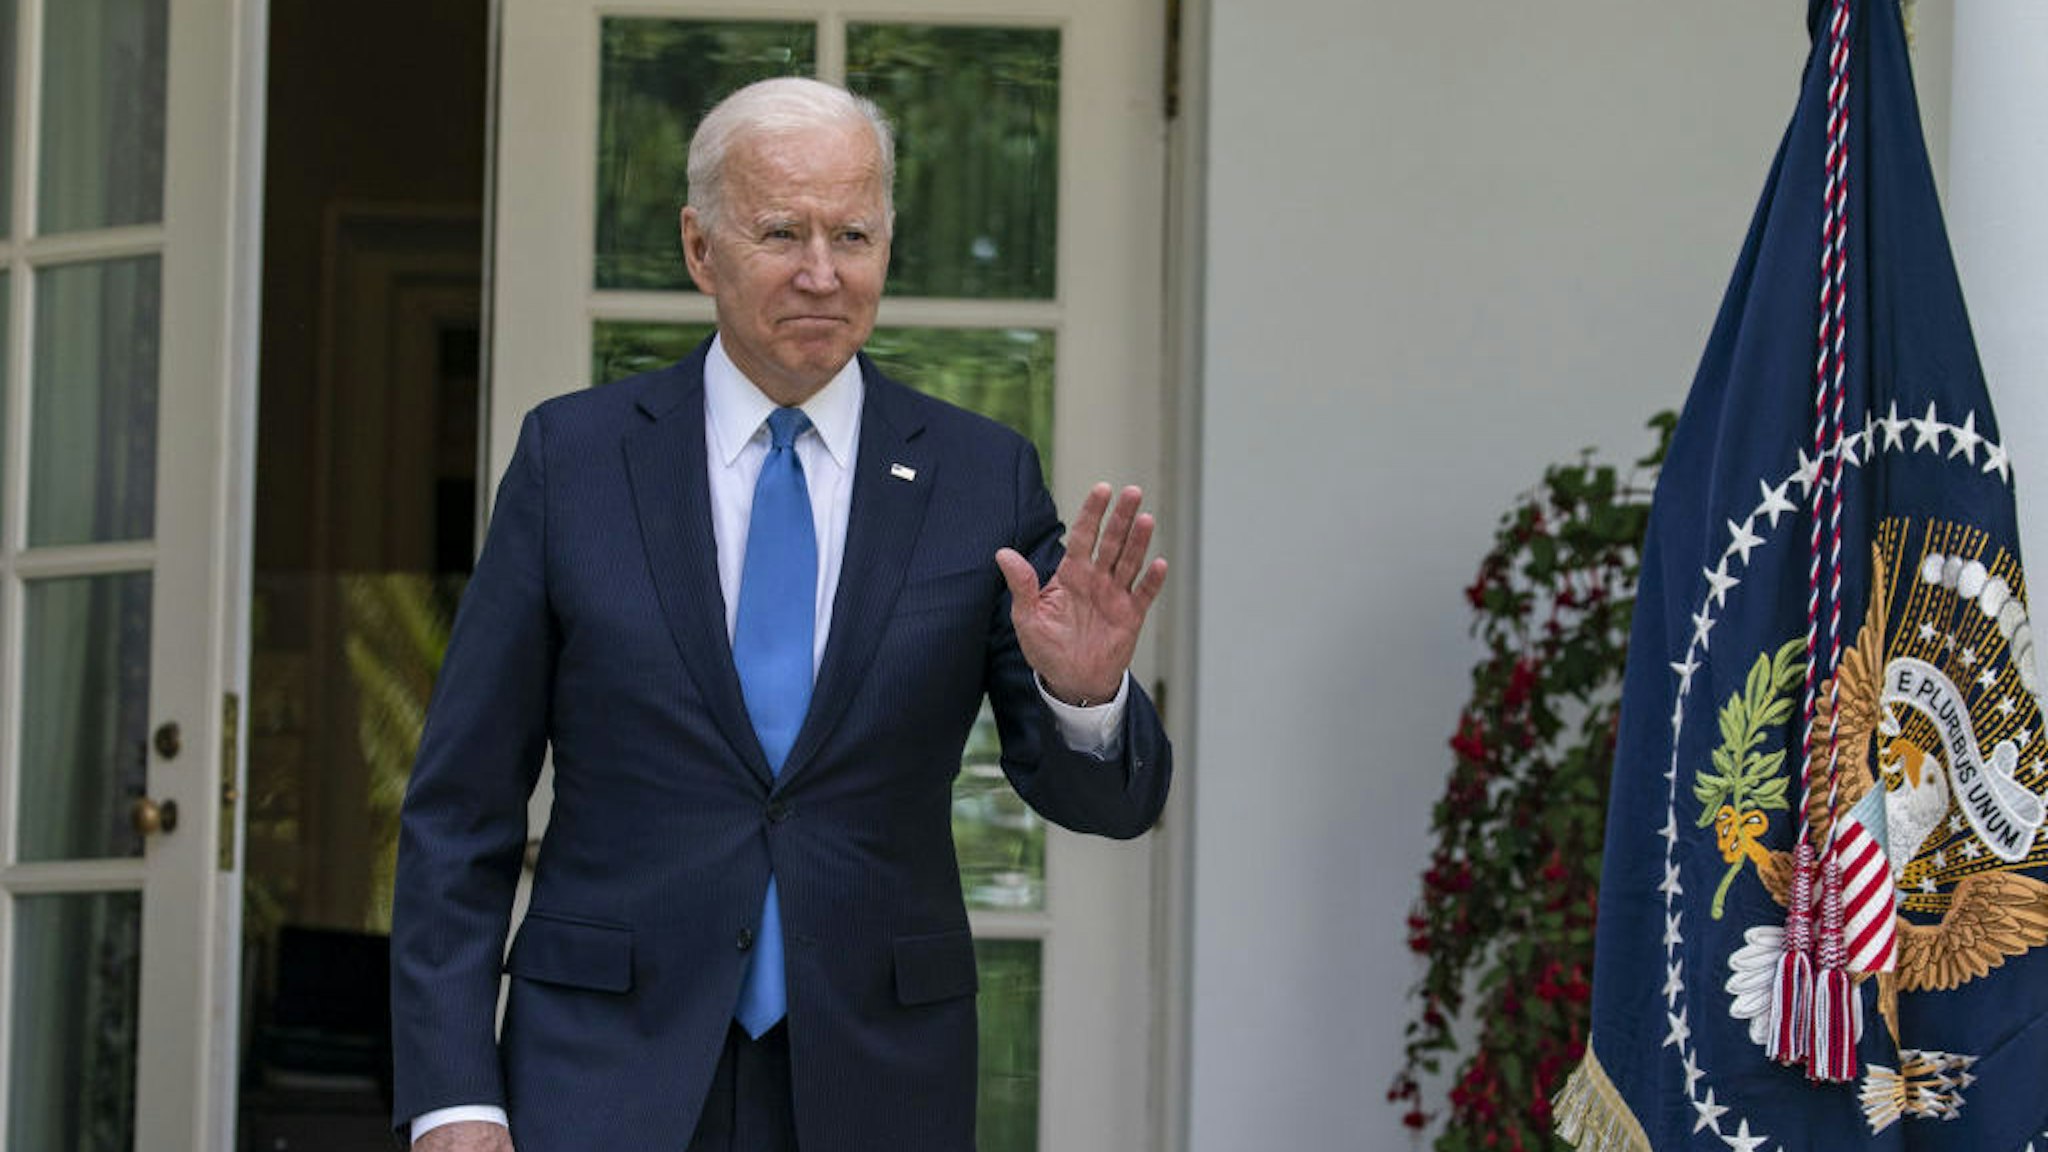 U.S. President Joe Biden arrives to speak in the Rose Garden of the White House in Washington, D.C., U.S., on Thursday, May 13, 2021. Fully vaccinated Americans can do away with wearing masks, the head of the U.S. Centers for Disease Control and Prevention said today, the most significant shift in federal guidelines since the start of the pandemic. Photographer: Tasos Katopidis/UPI/Bloomberg